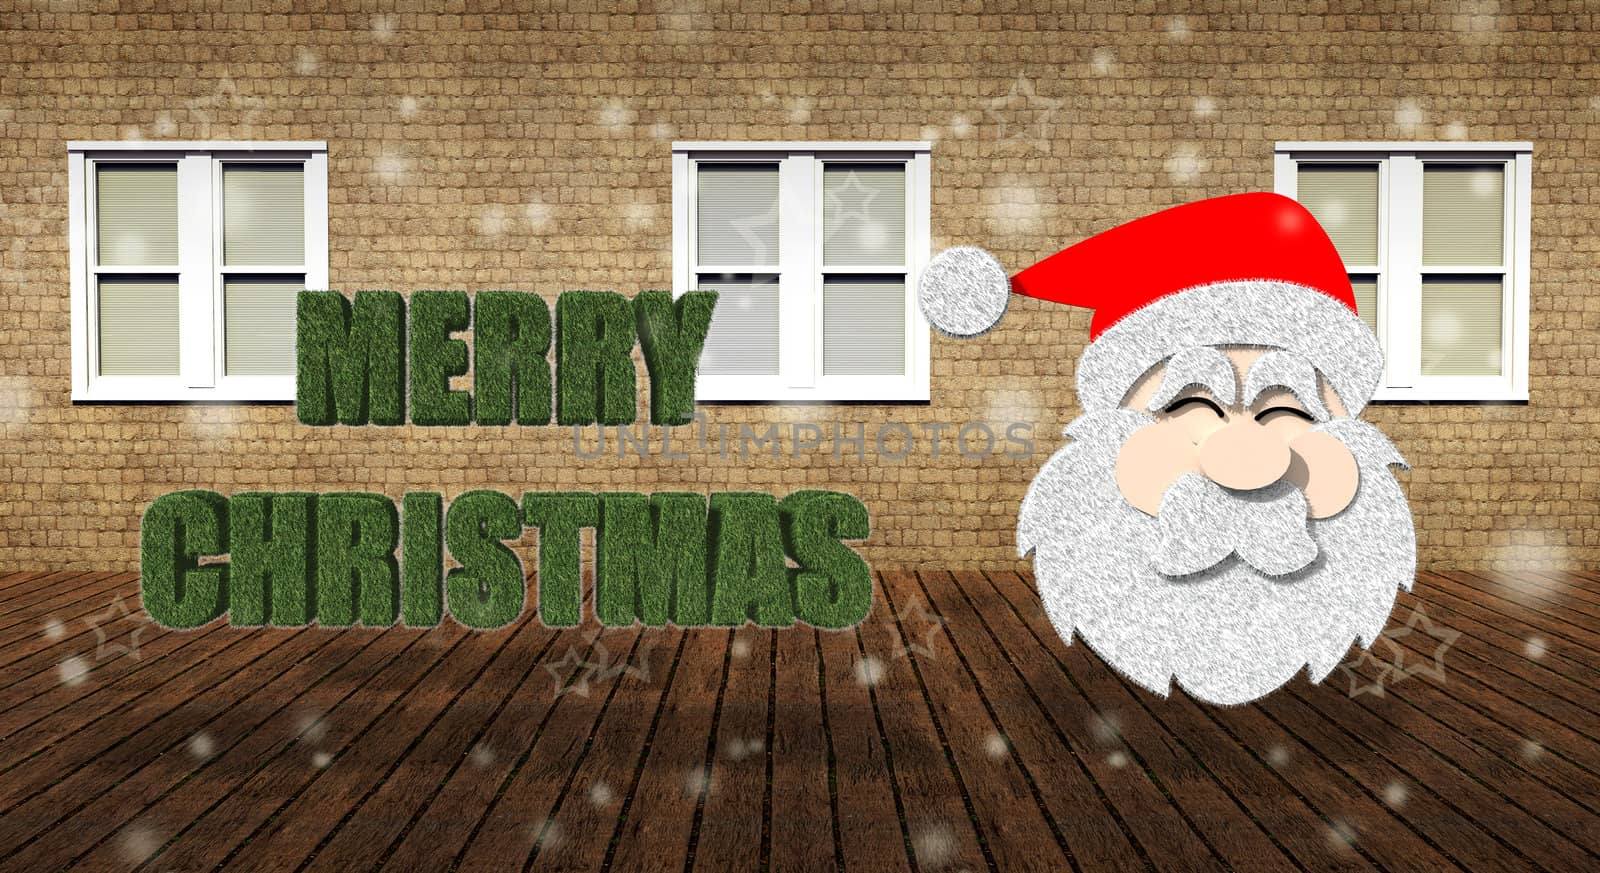 Merry Christmas with Santa Claus in grunge interior by siraanamwong